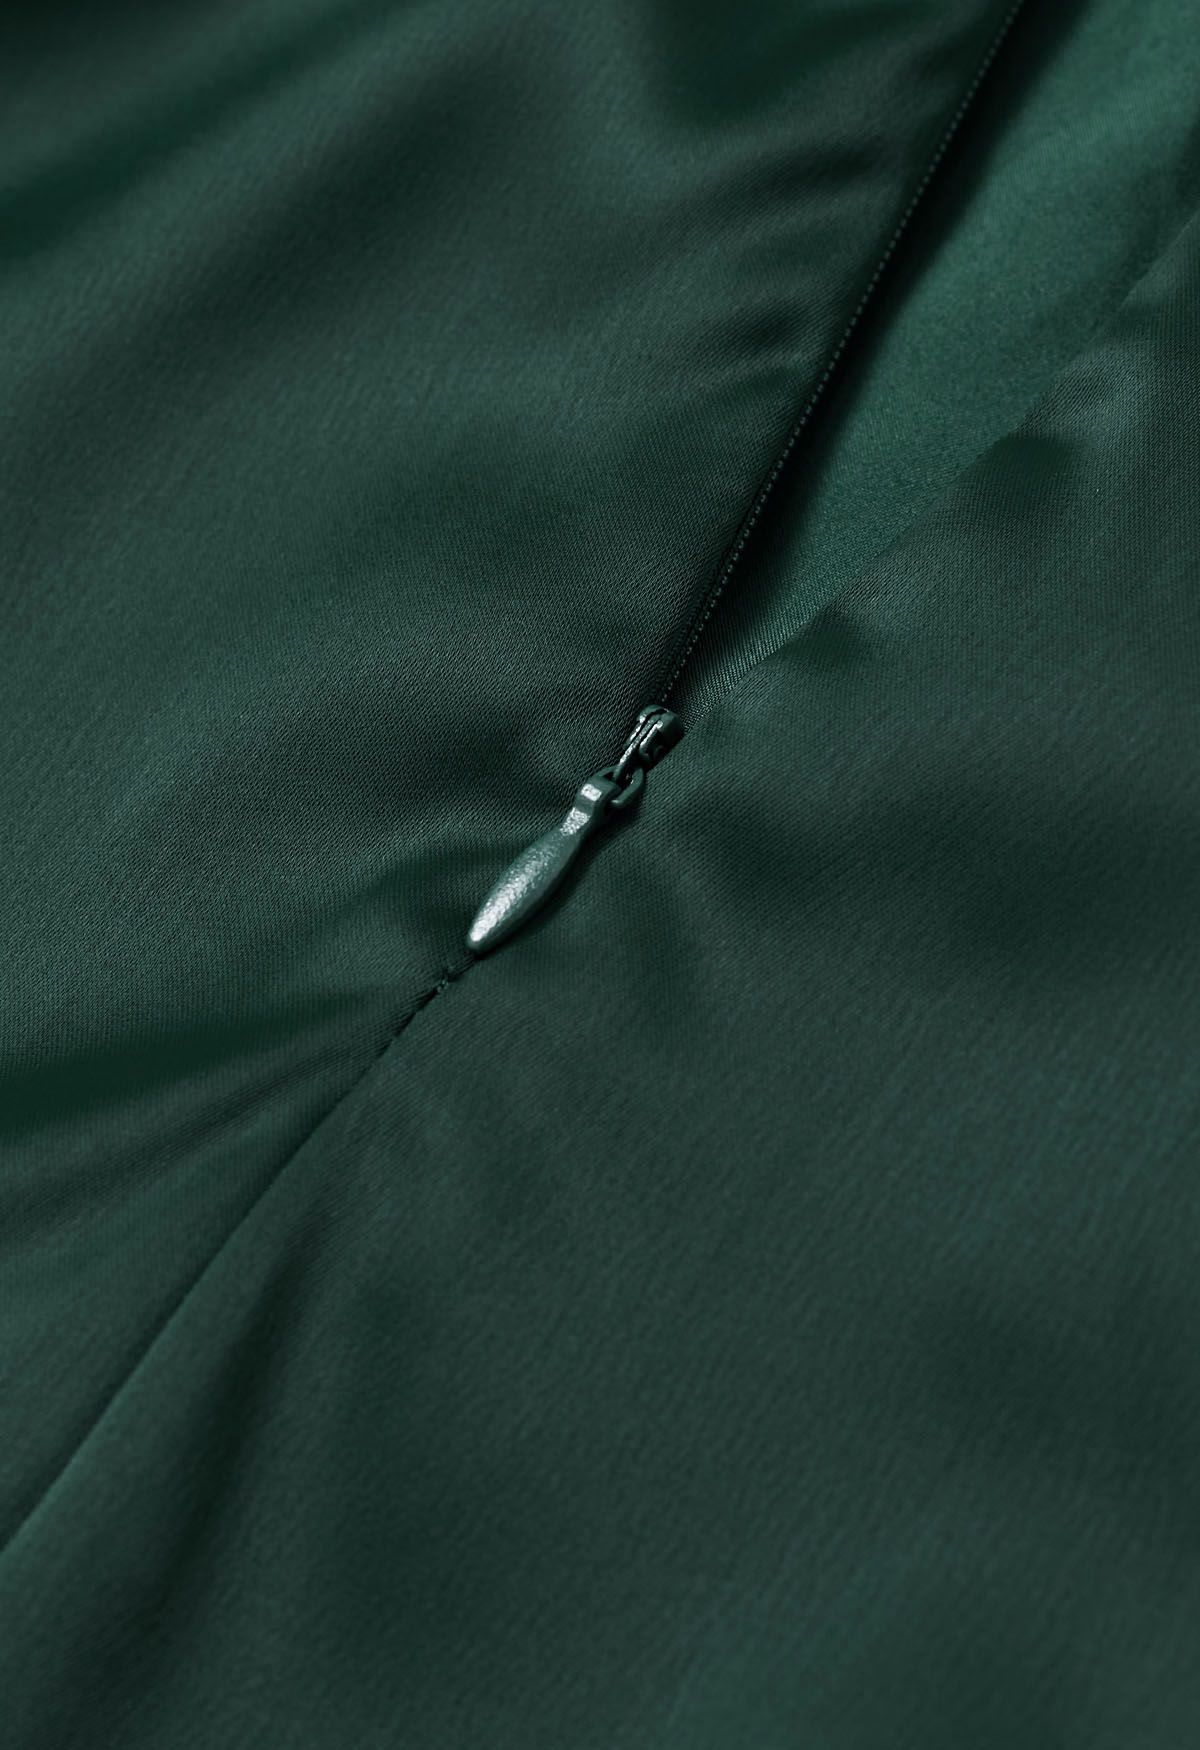 Plunging V-Neck Ruched Waist Satin Dress in Emerald